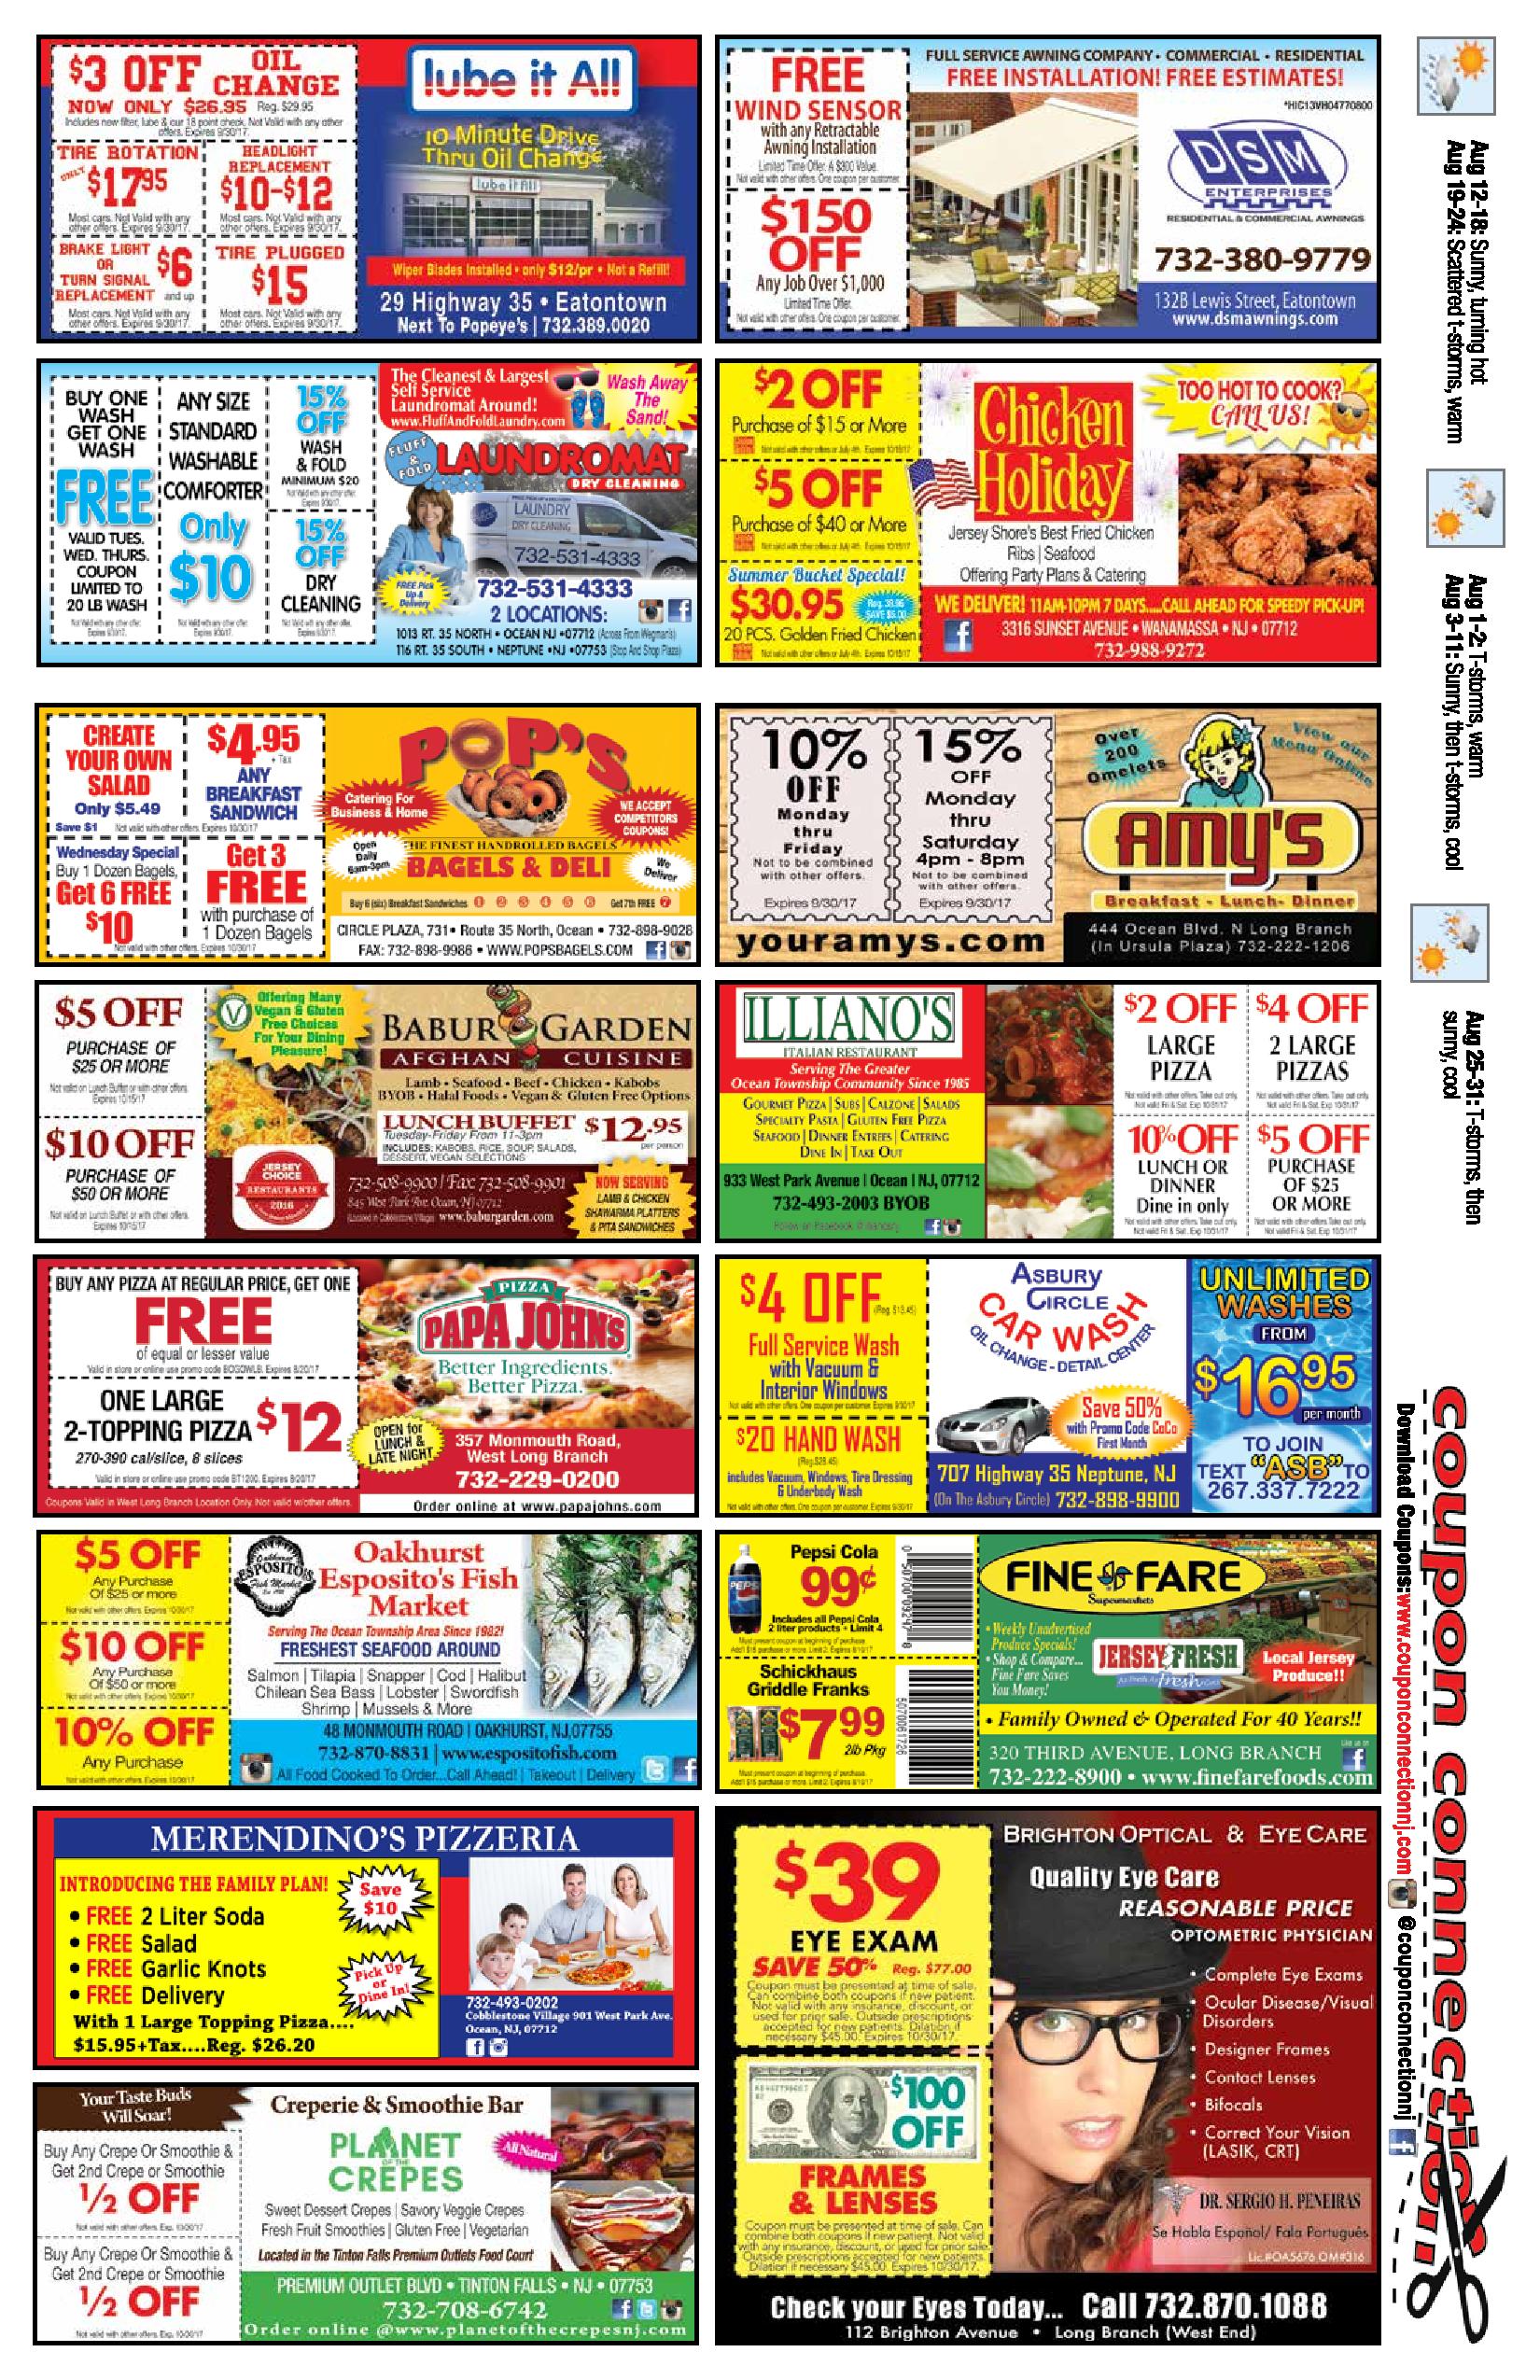 JUNE 2017 COUPON CONNECTION/SUMMER FUN CONNECTION – CLICK TO SEE COUPONS